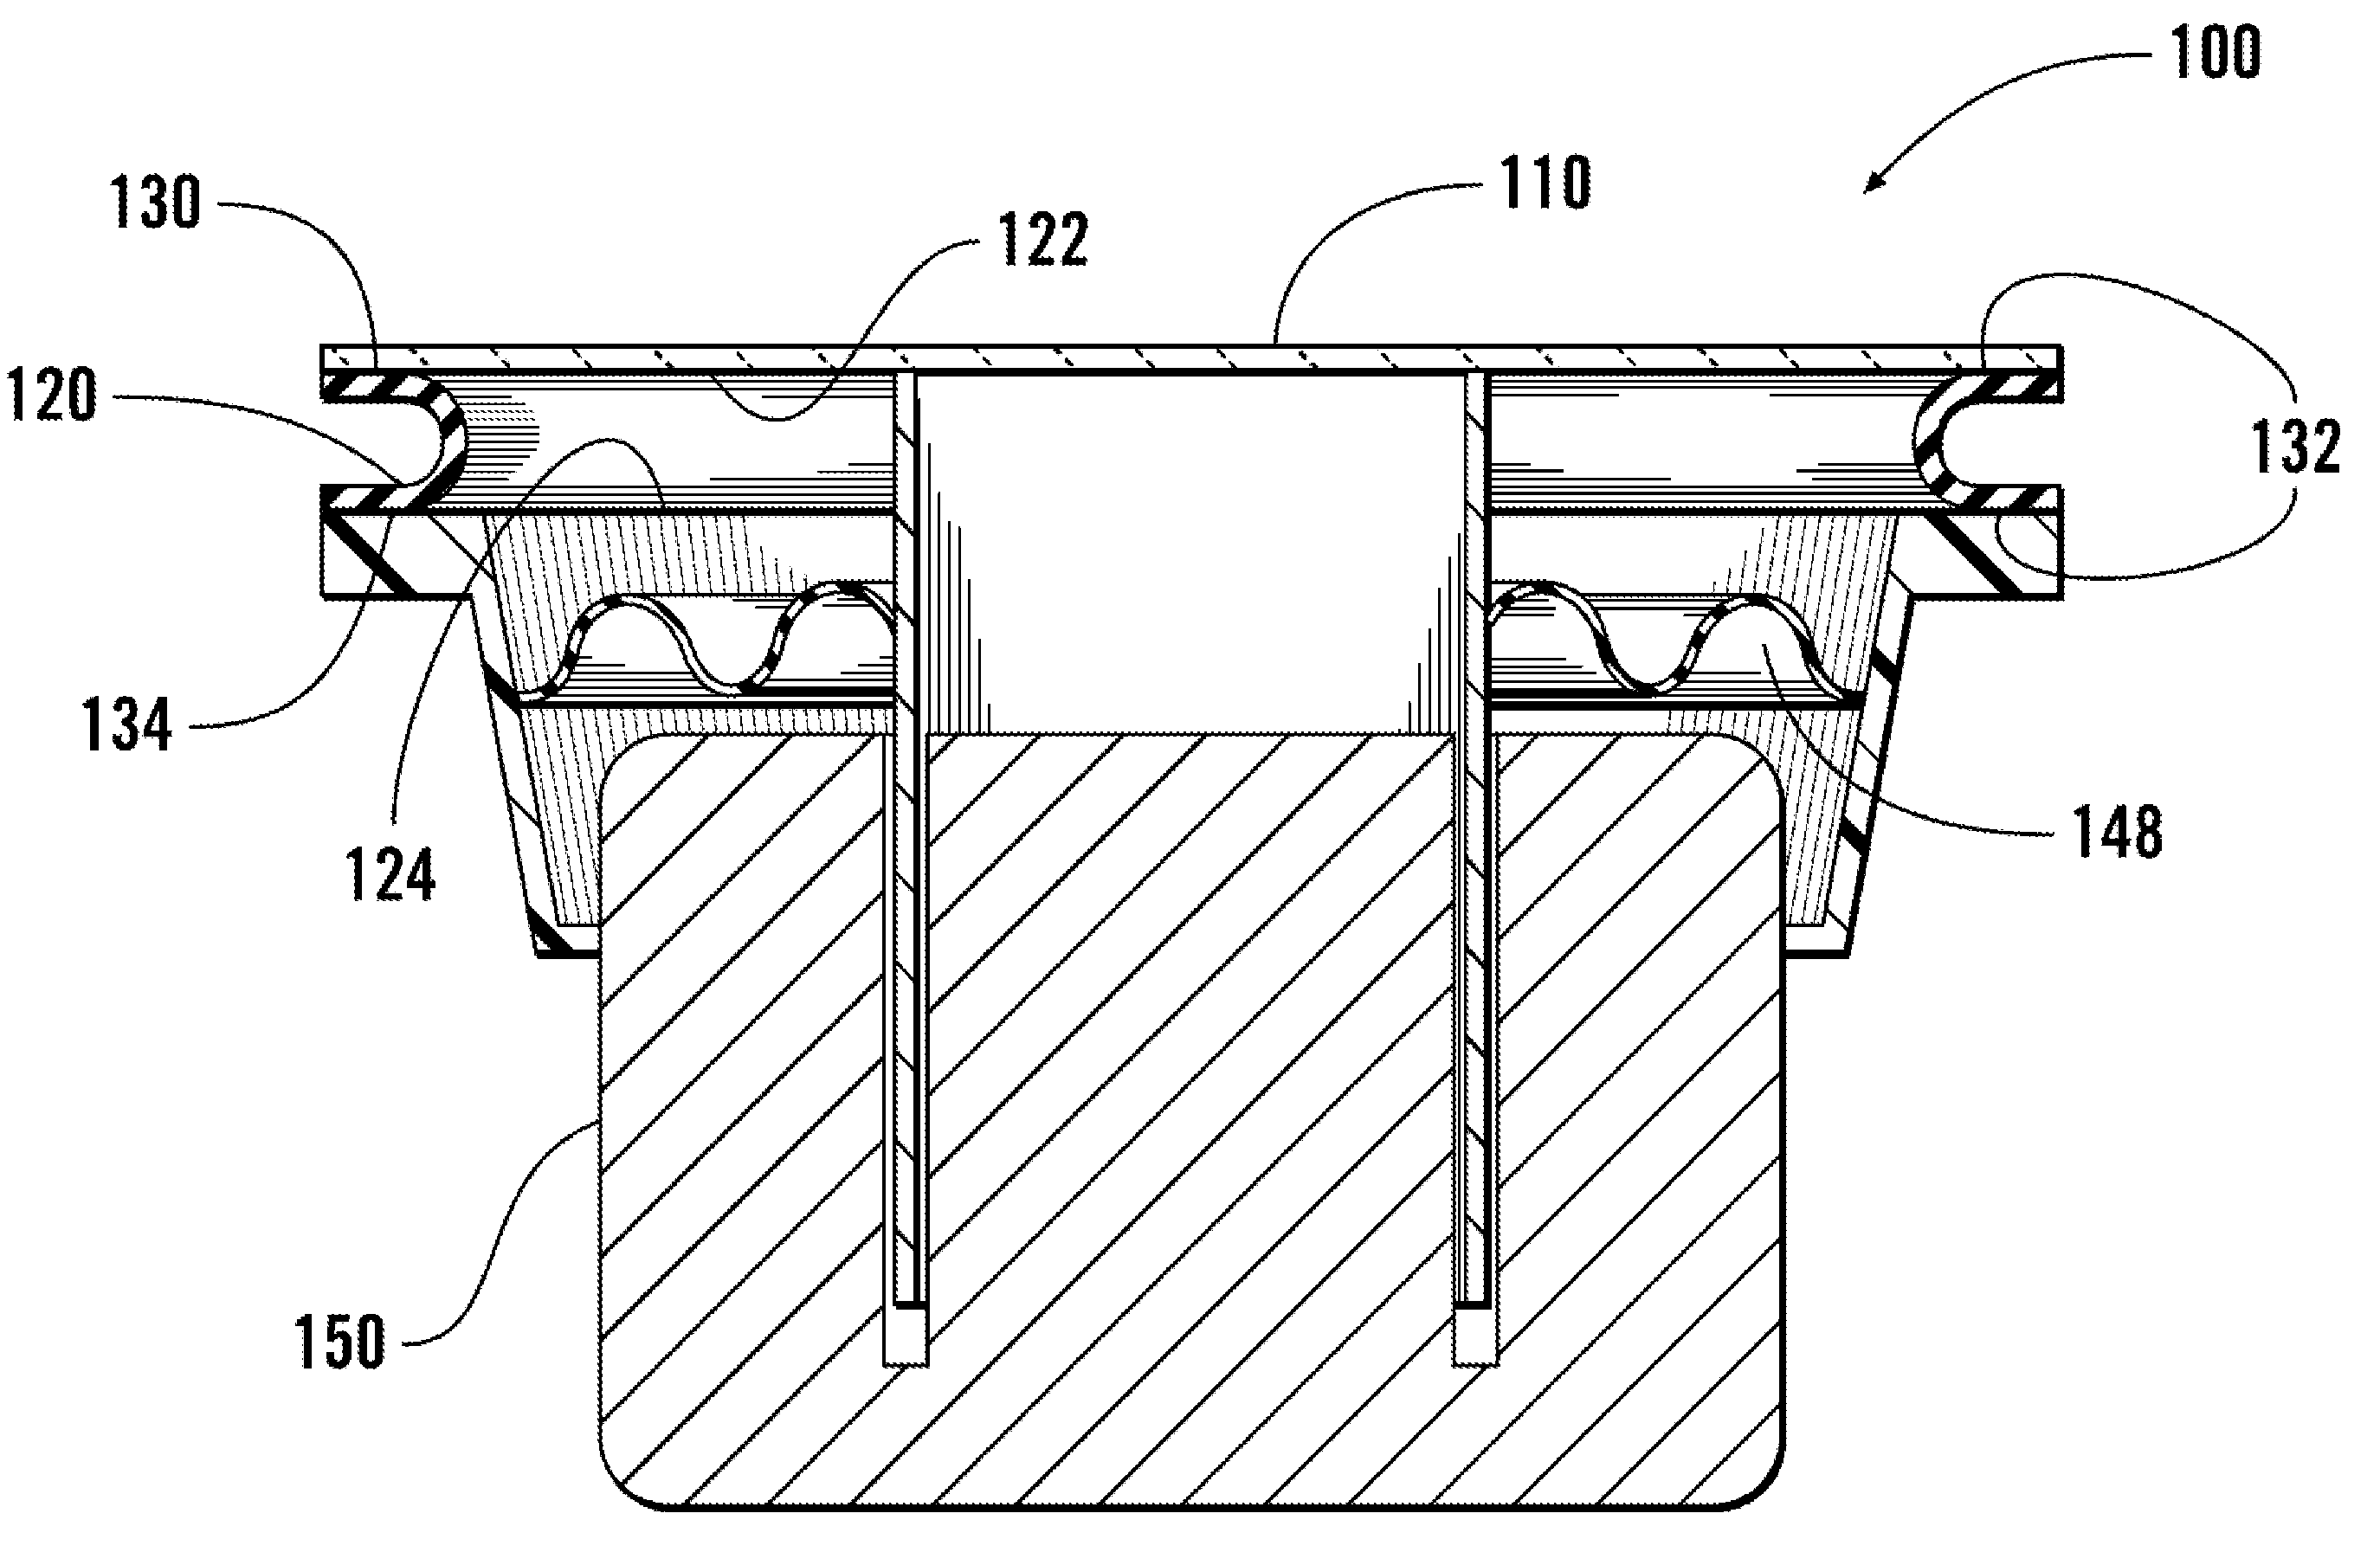 Loudspeaker with rear surround support